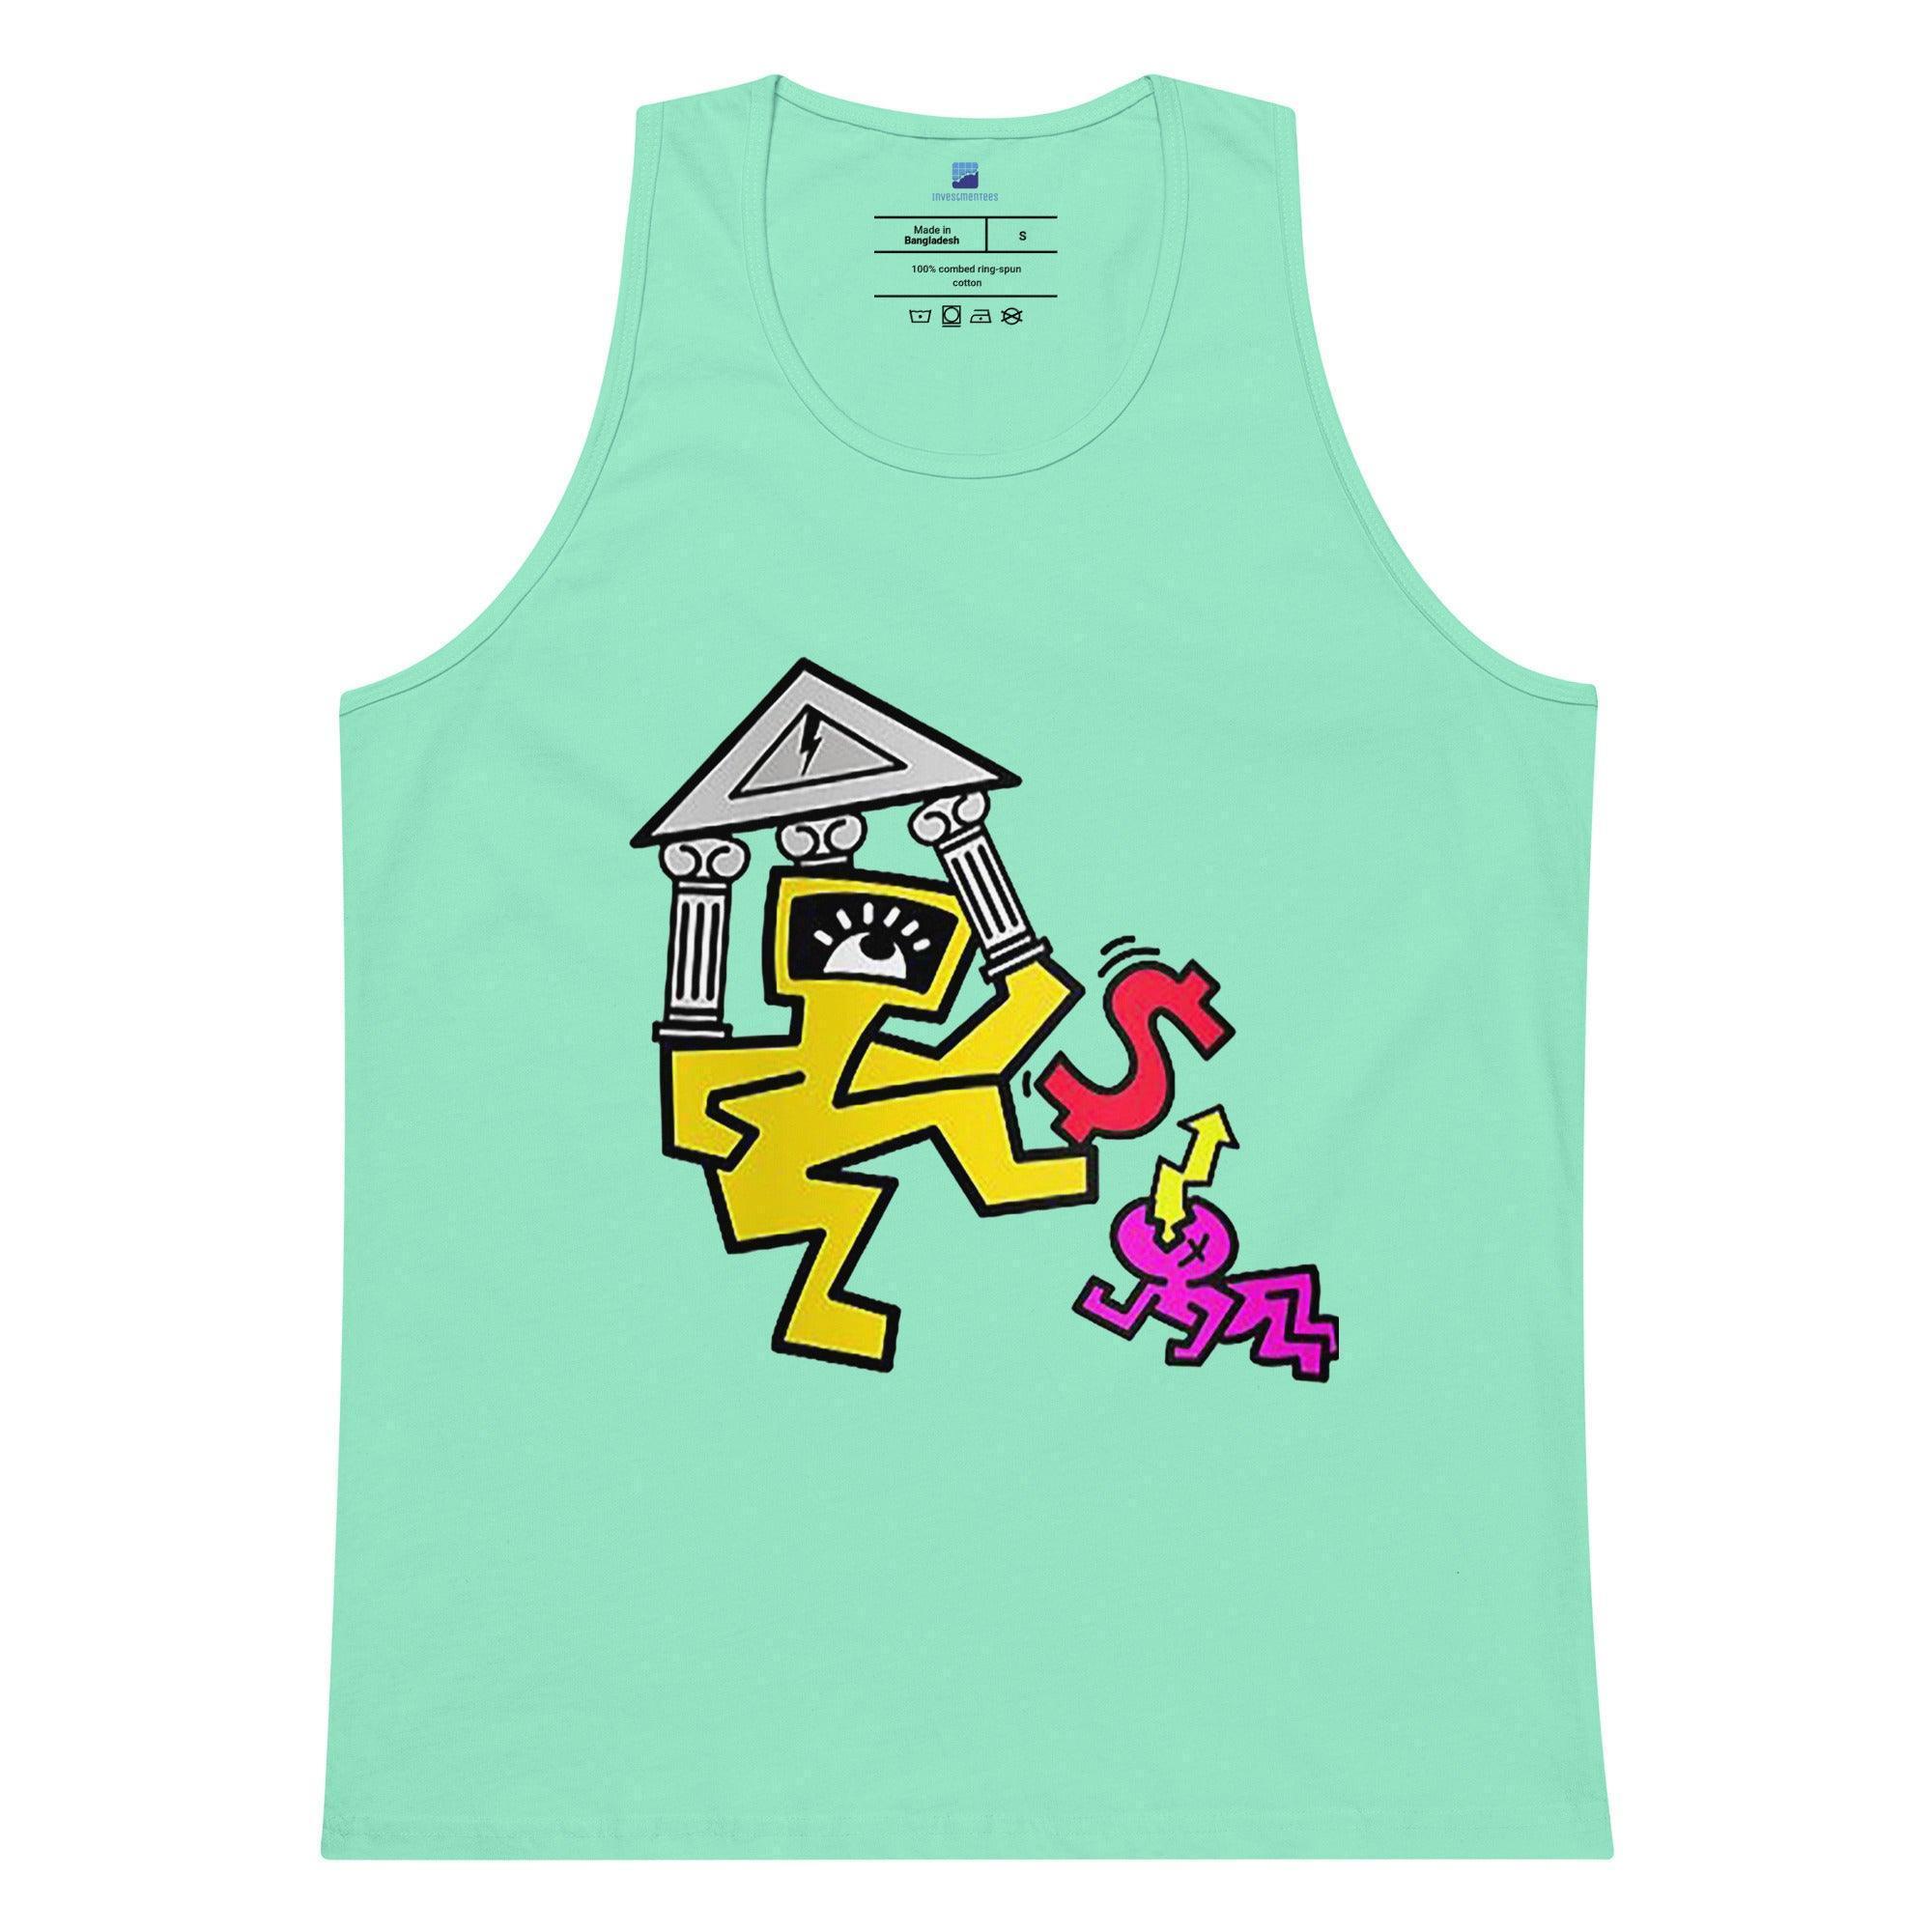 Banking Is Shaky Tank Top - InvestmenTees